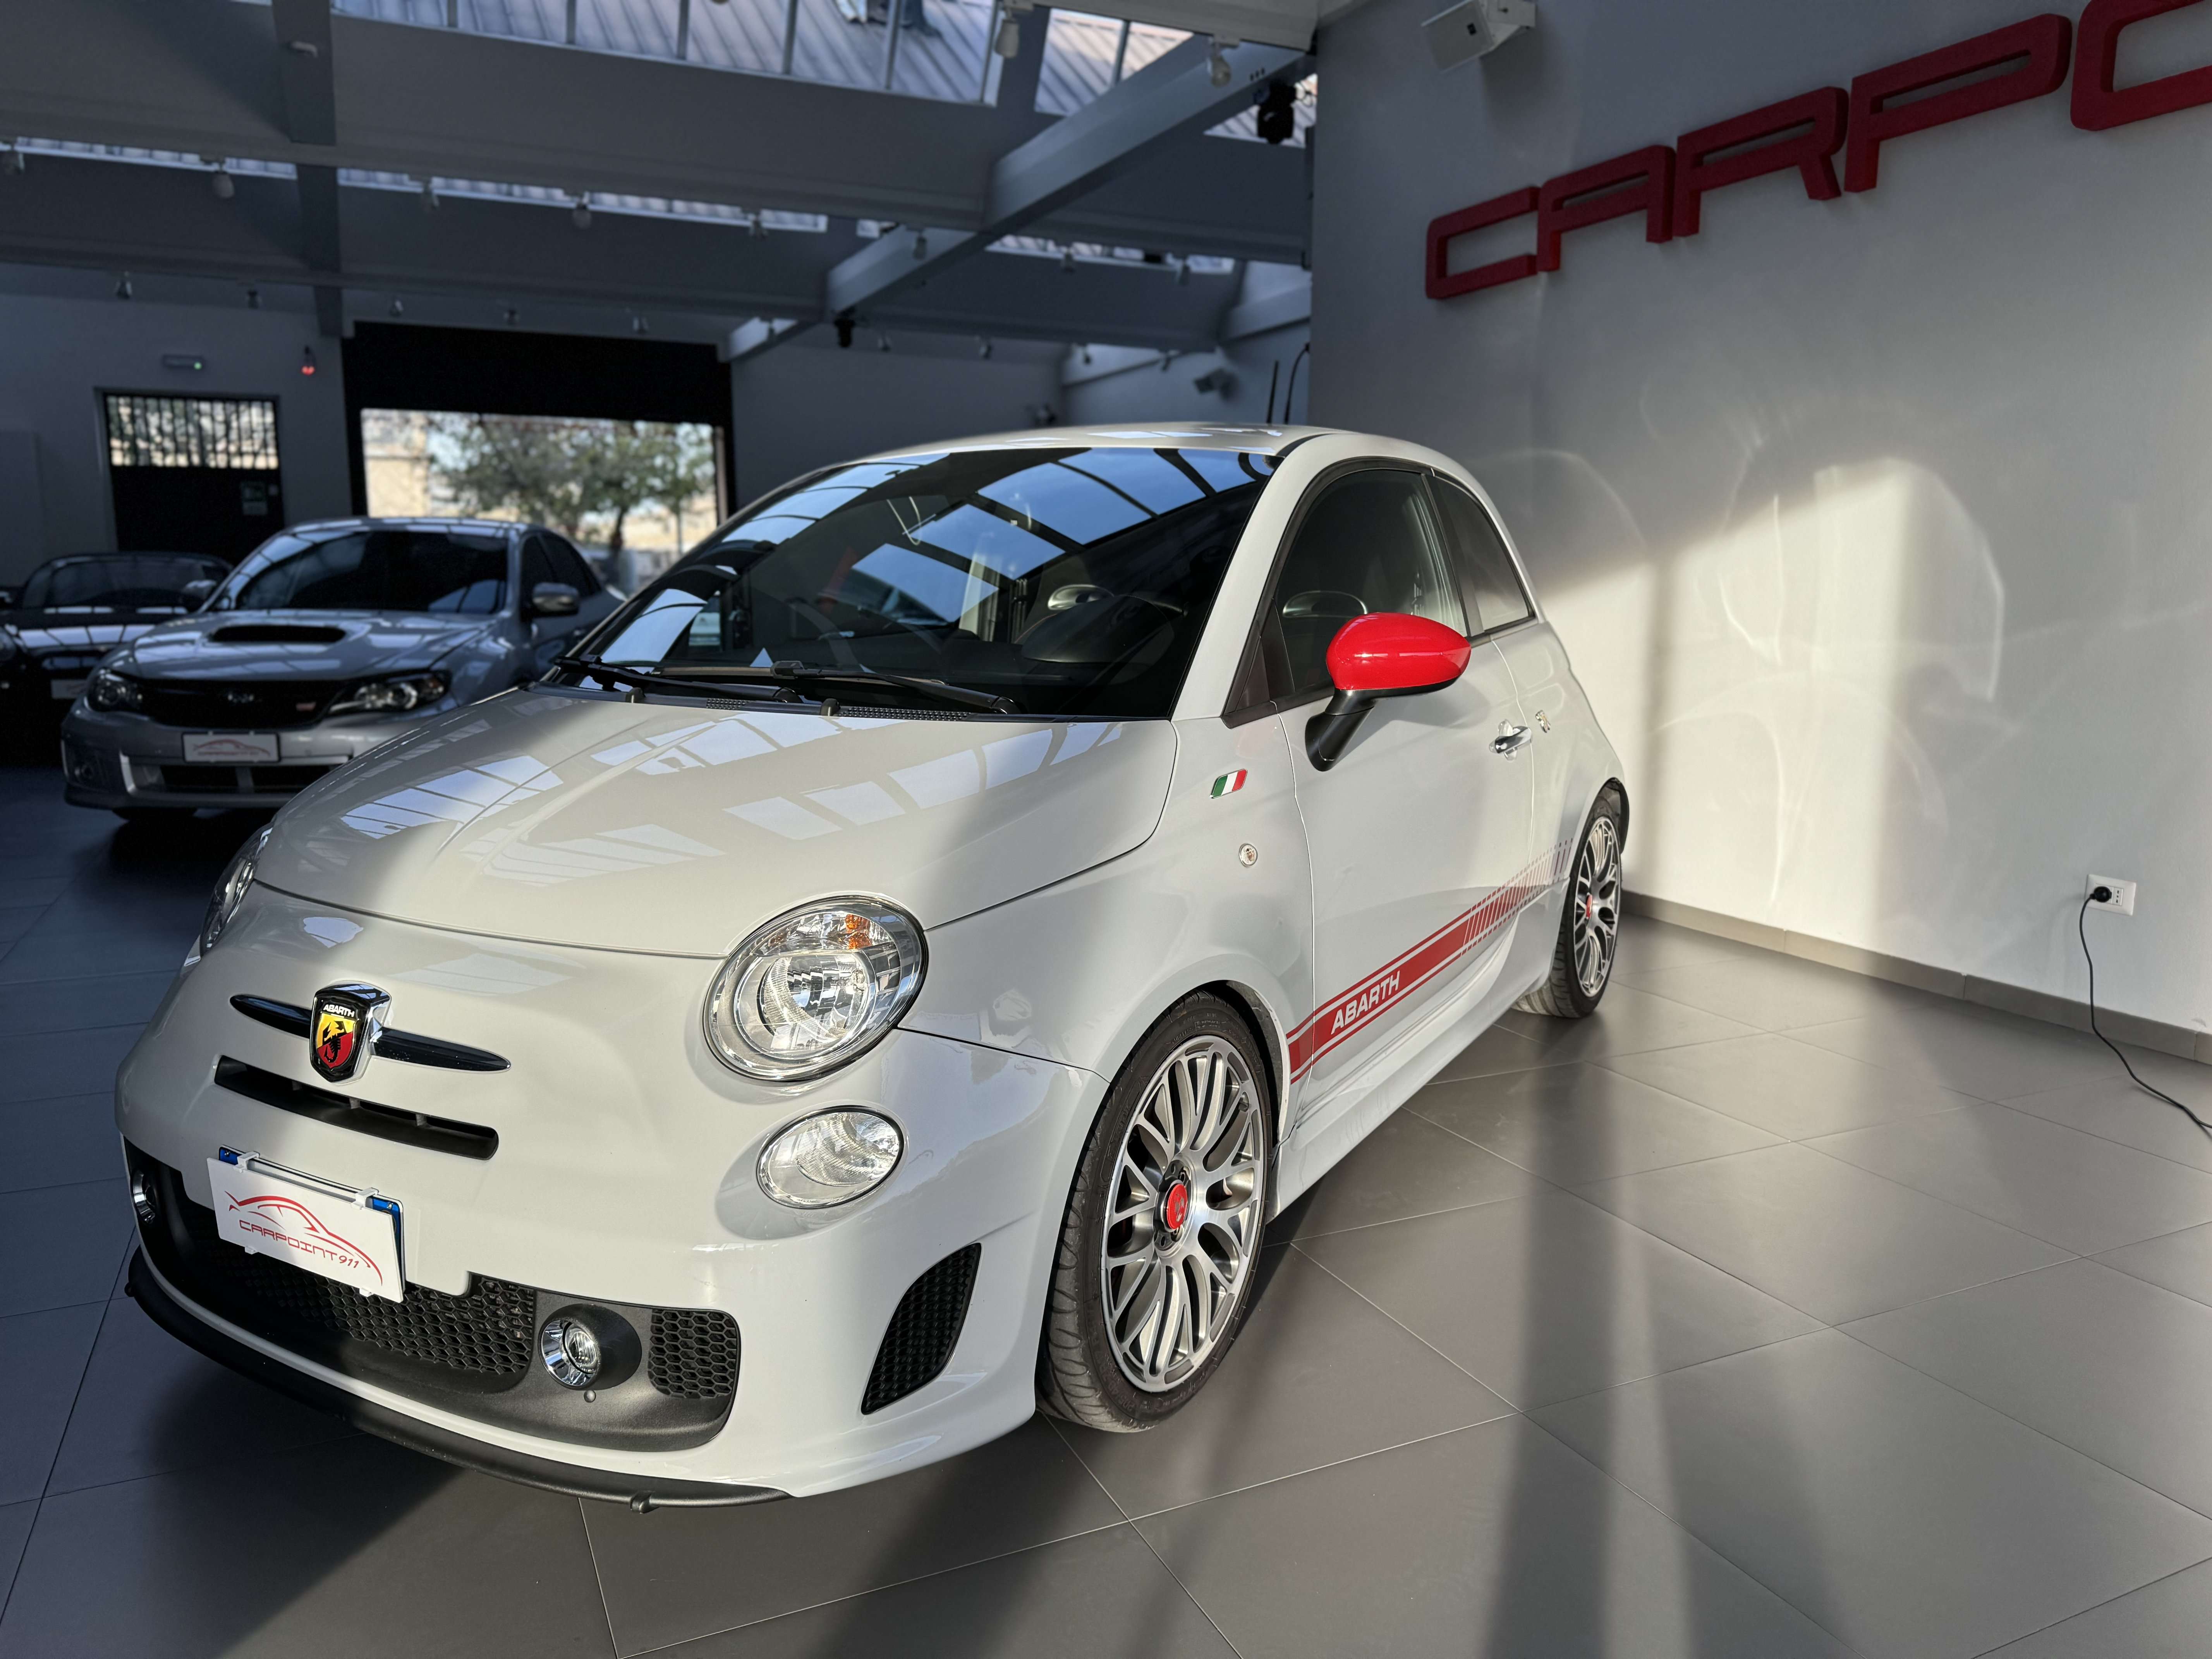 Abarth 500 Compact in White used in Vittuone - MI for € 12,900.-